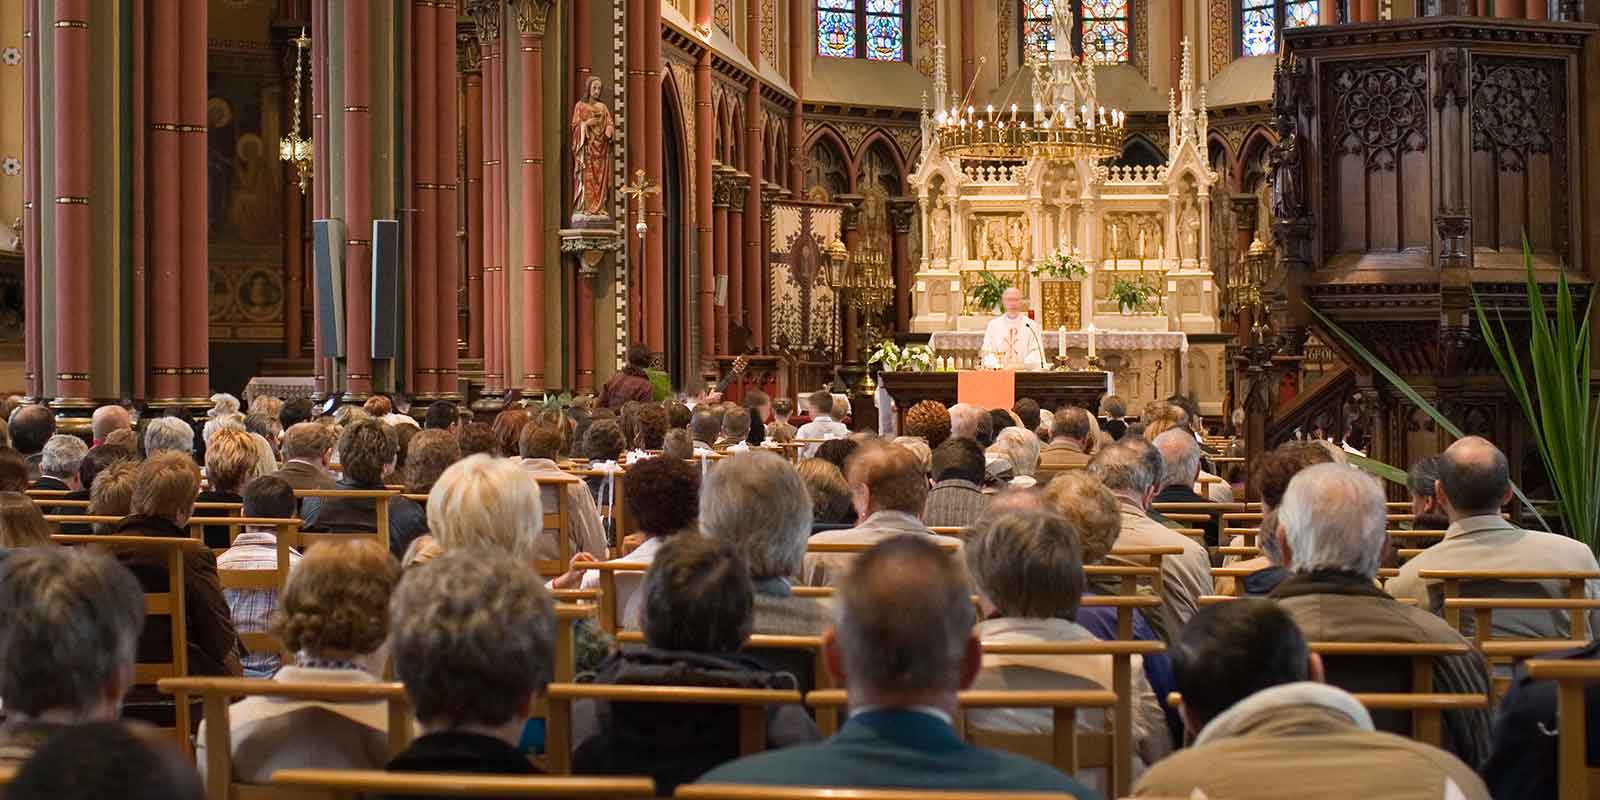 Mass being held in a Catholic church.